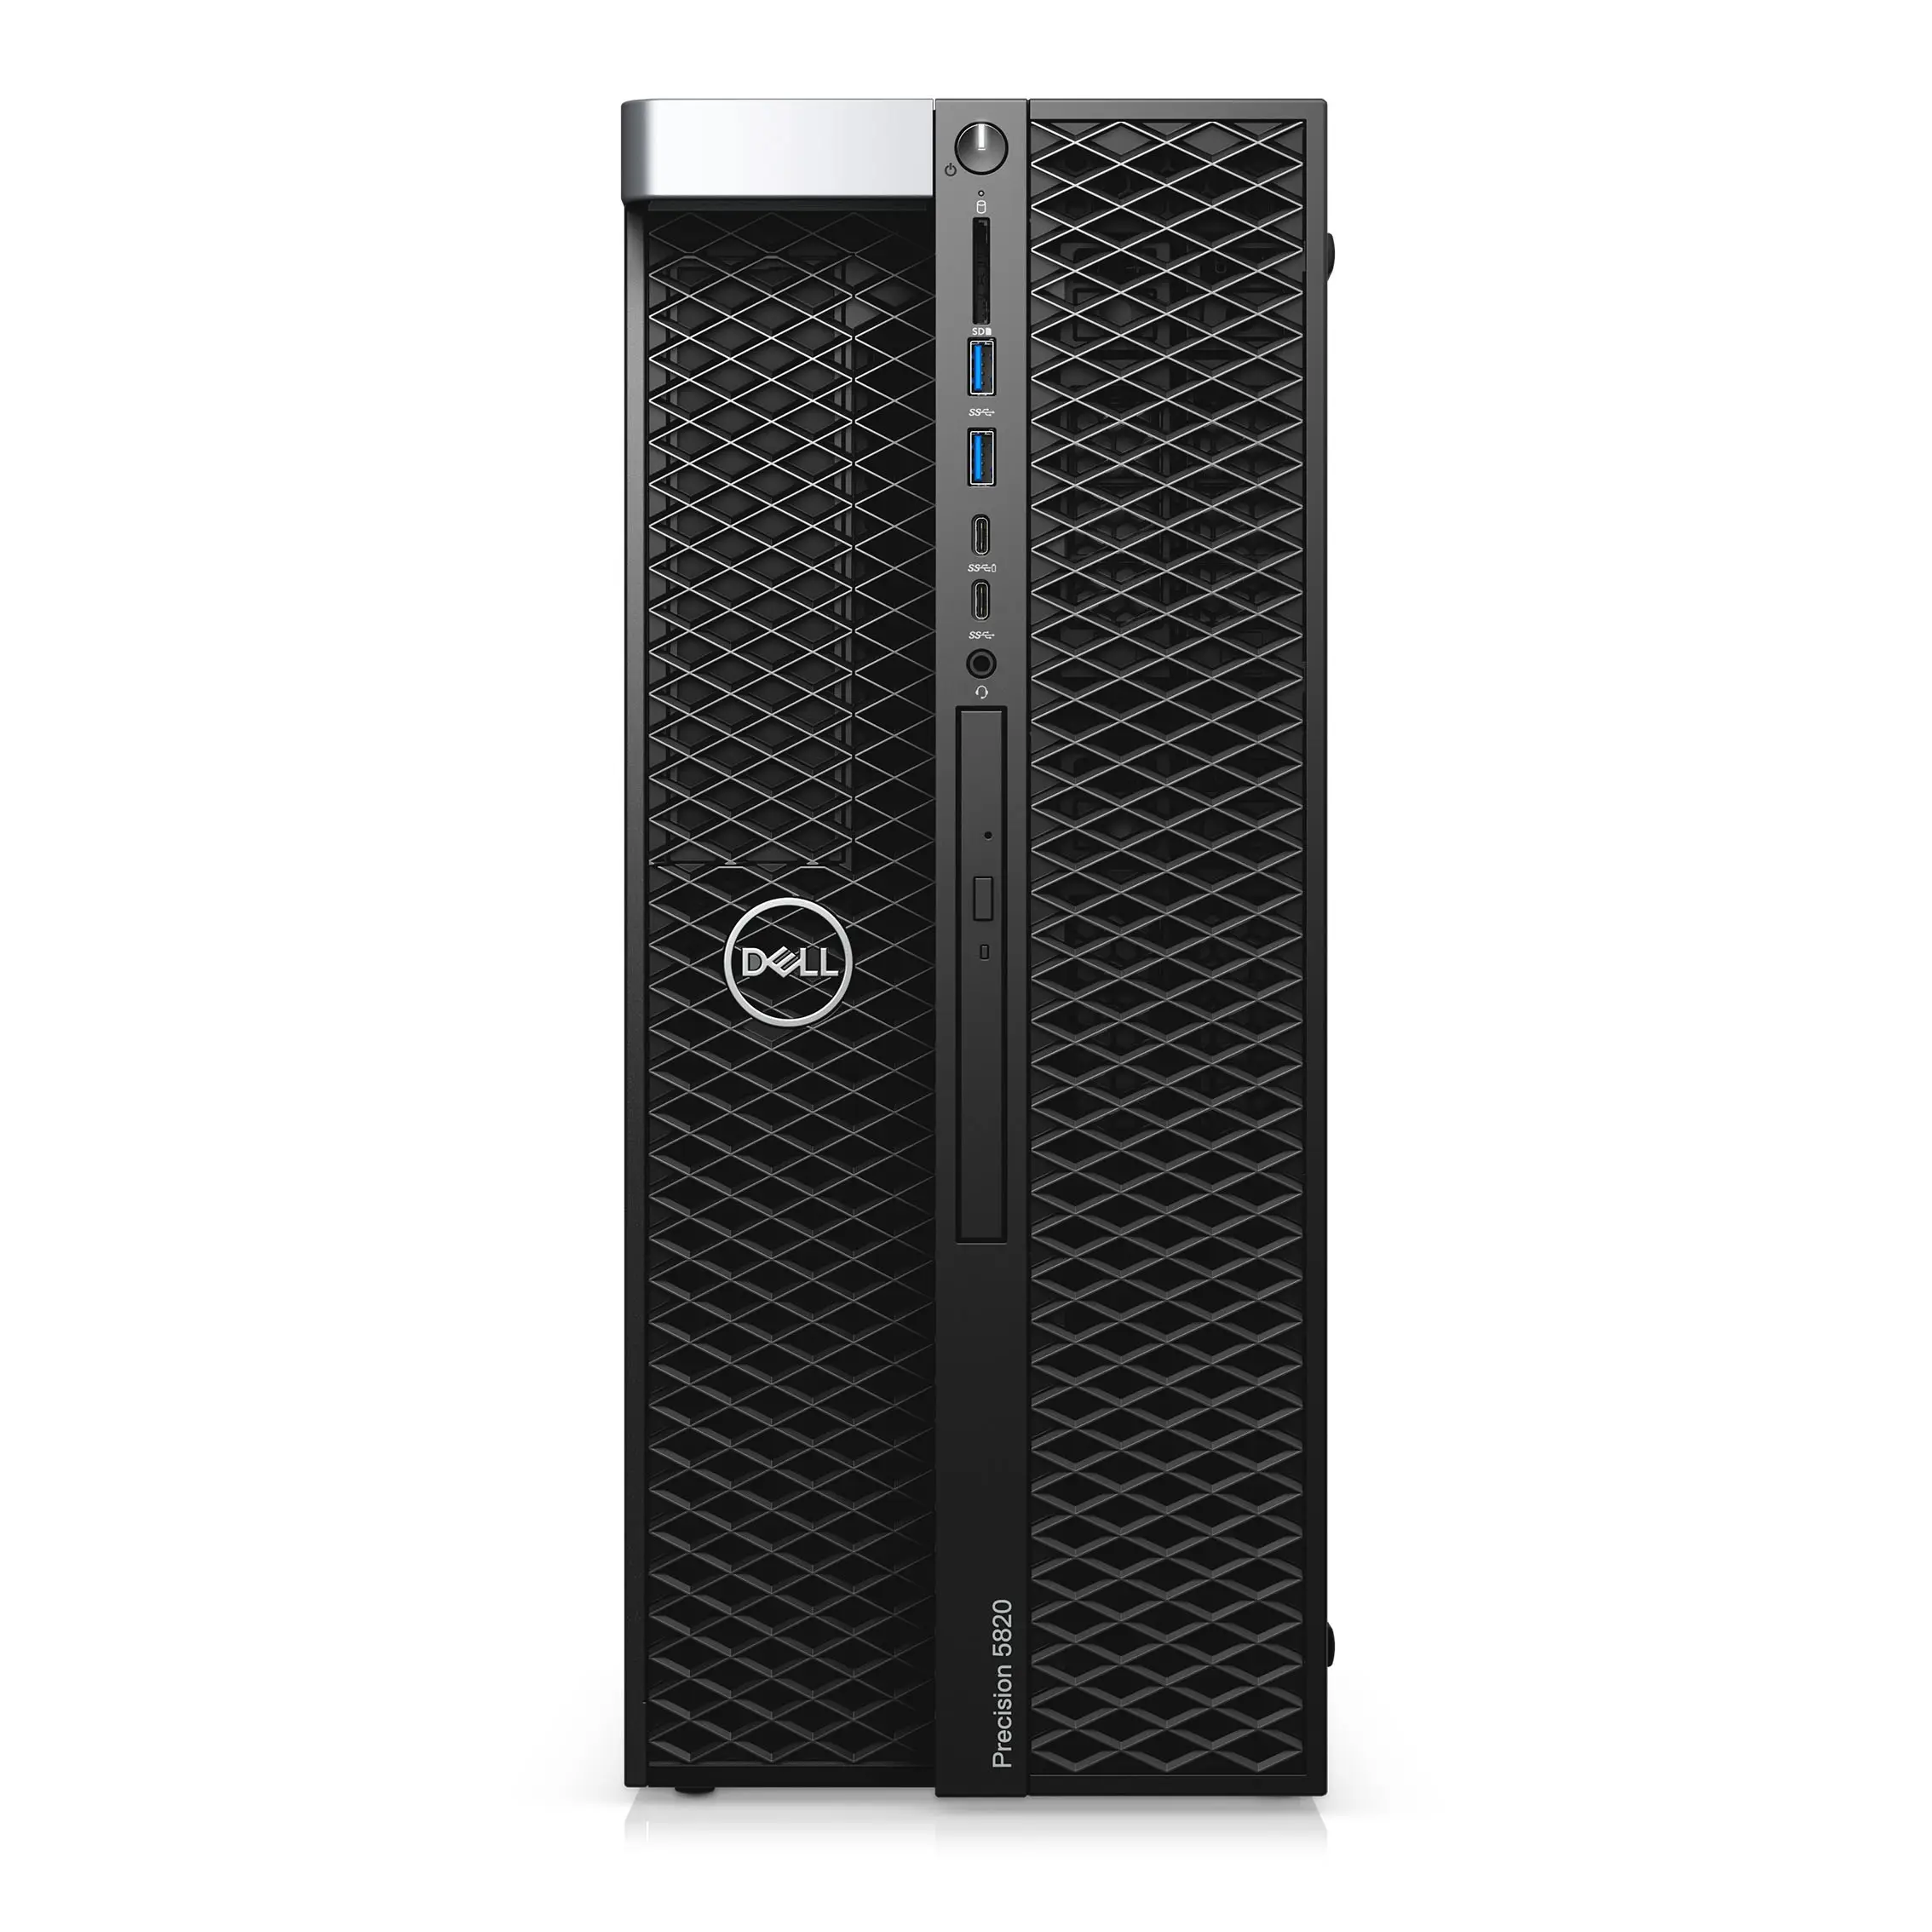 New arrival wholesales original Intels Xeon W-2195 3.3GHz Dells Precision 5820 Tower Workstation in stock